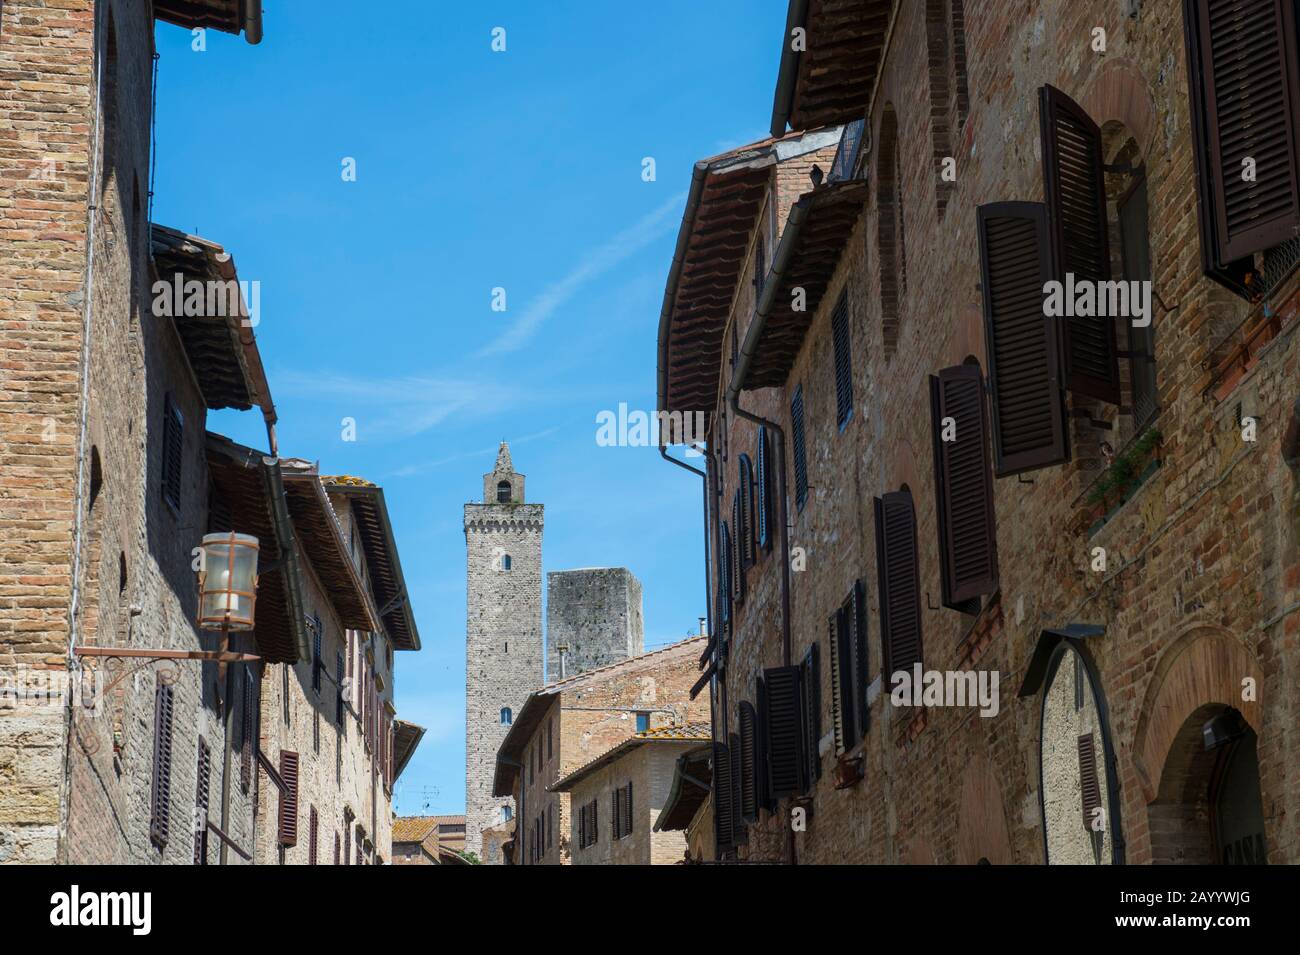 Street scene with towers in the medieval walled hill town of San Gimignano in Tuscany, Italy. Stock Photo